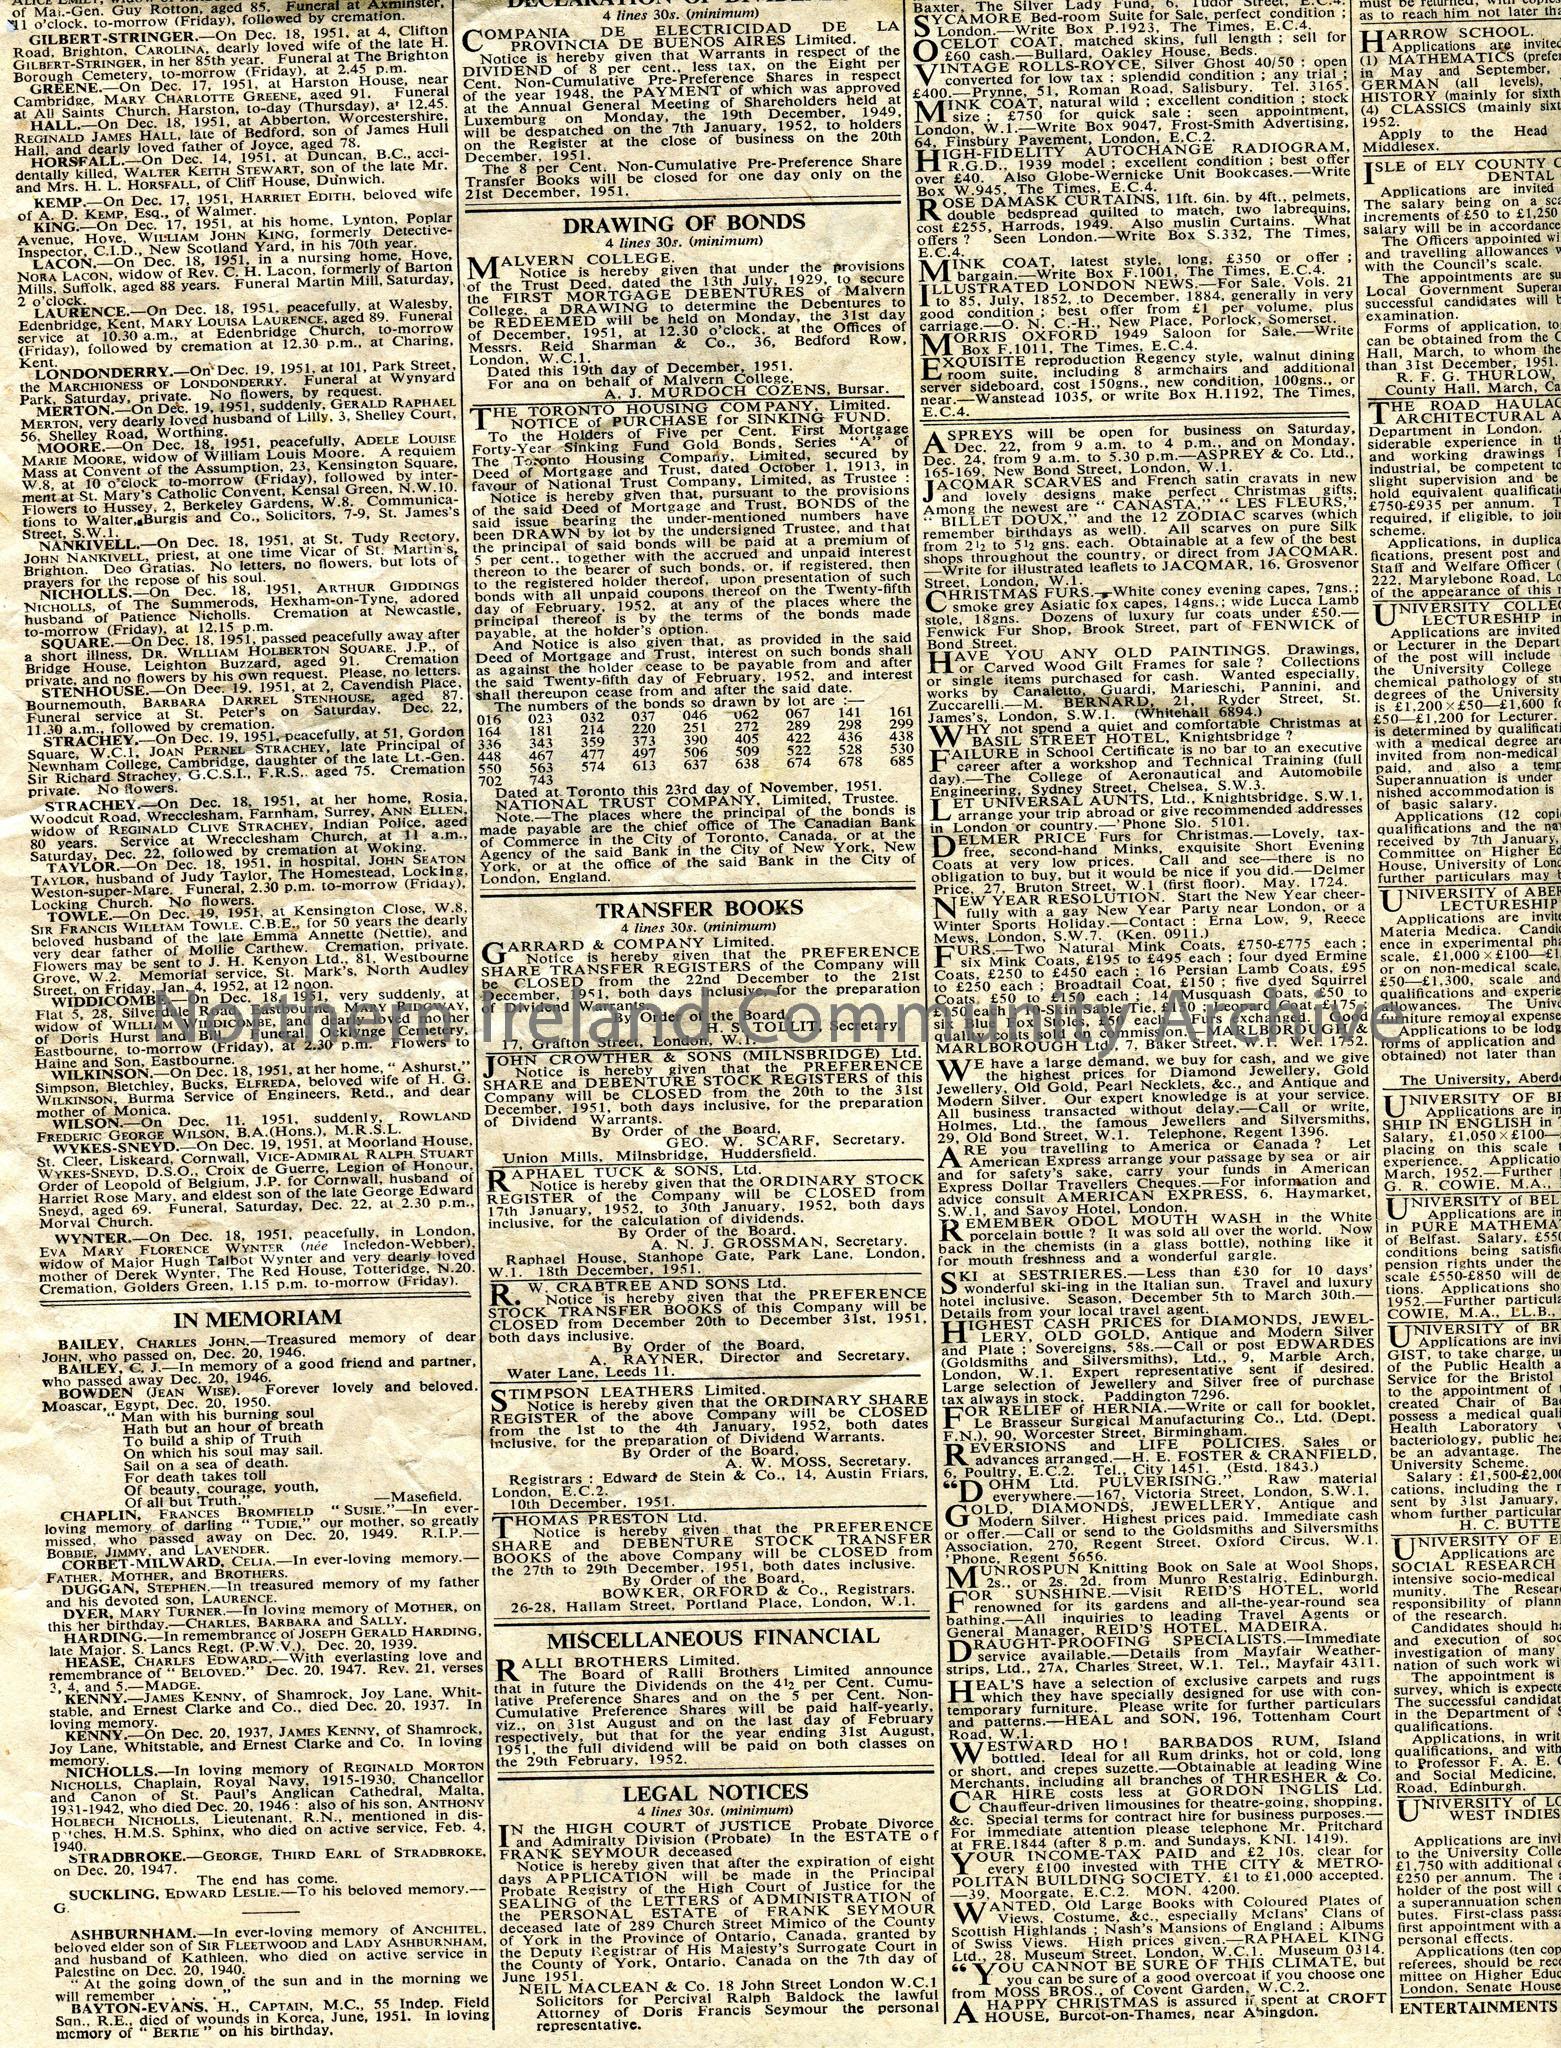 Front and back page from ‘The Times’ newspaper, ‘Late London Edition’. Dated Thursday 20th December, 1951. Includes ‘A Route to Everest’ feature, birt… – img025c